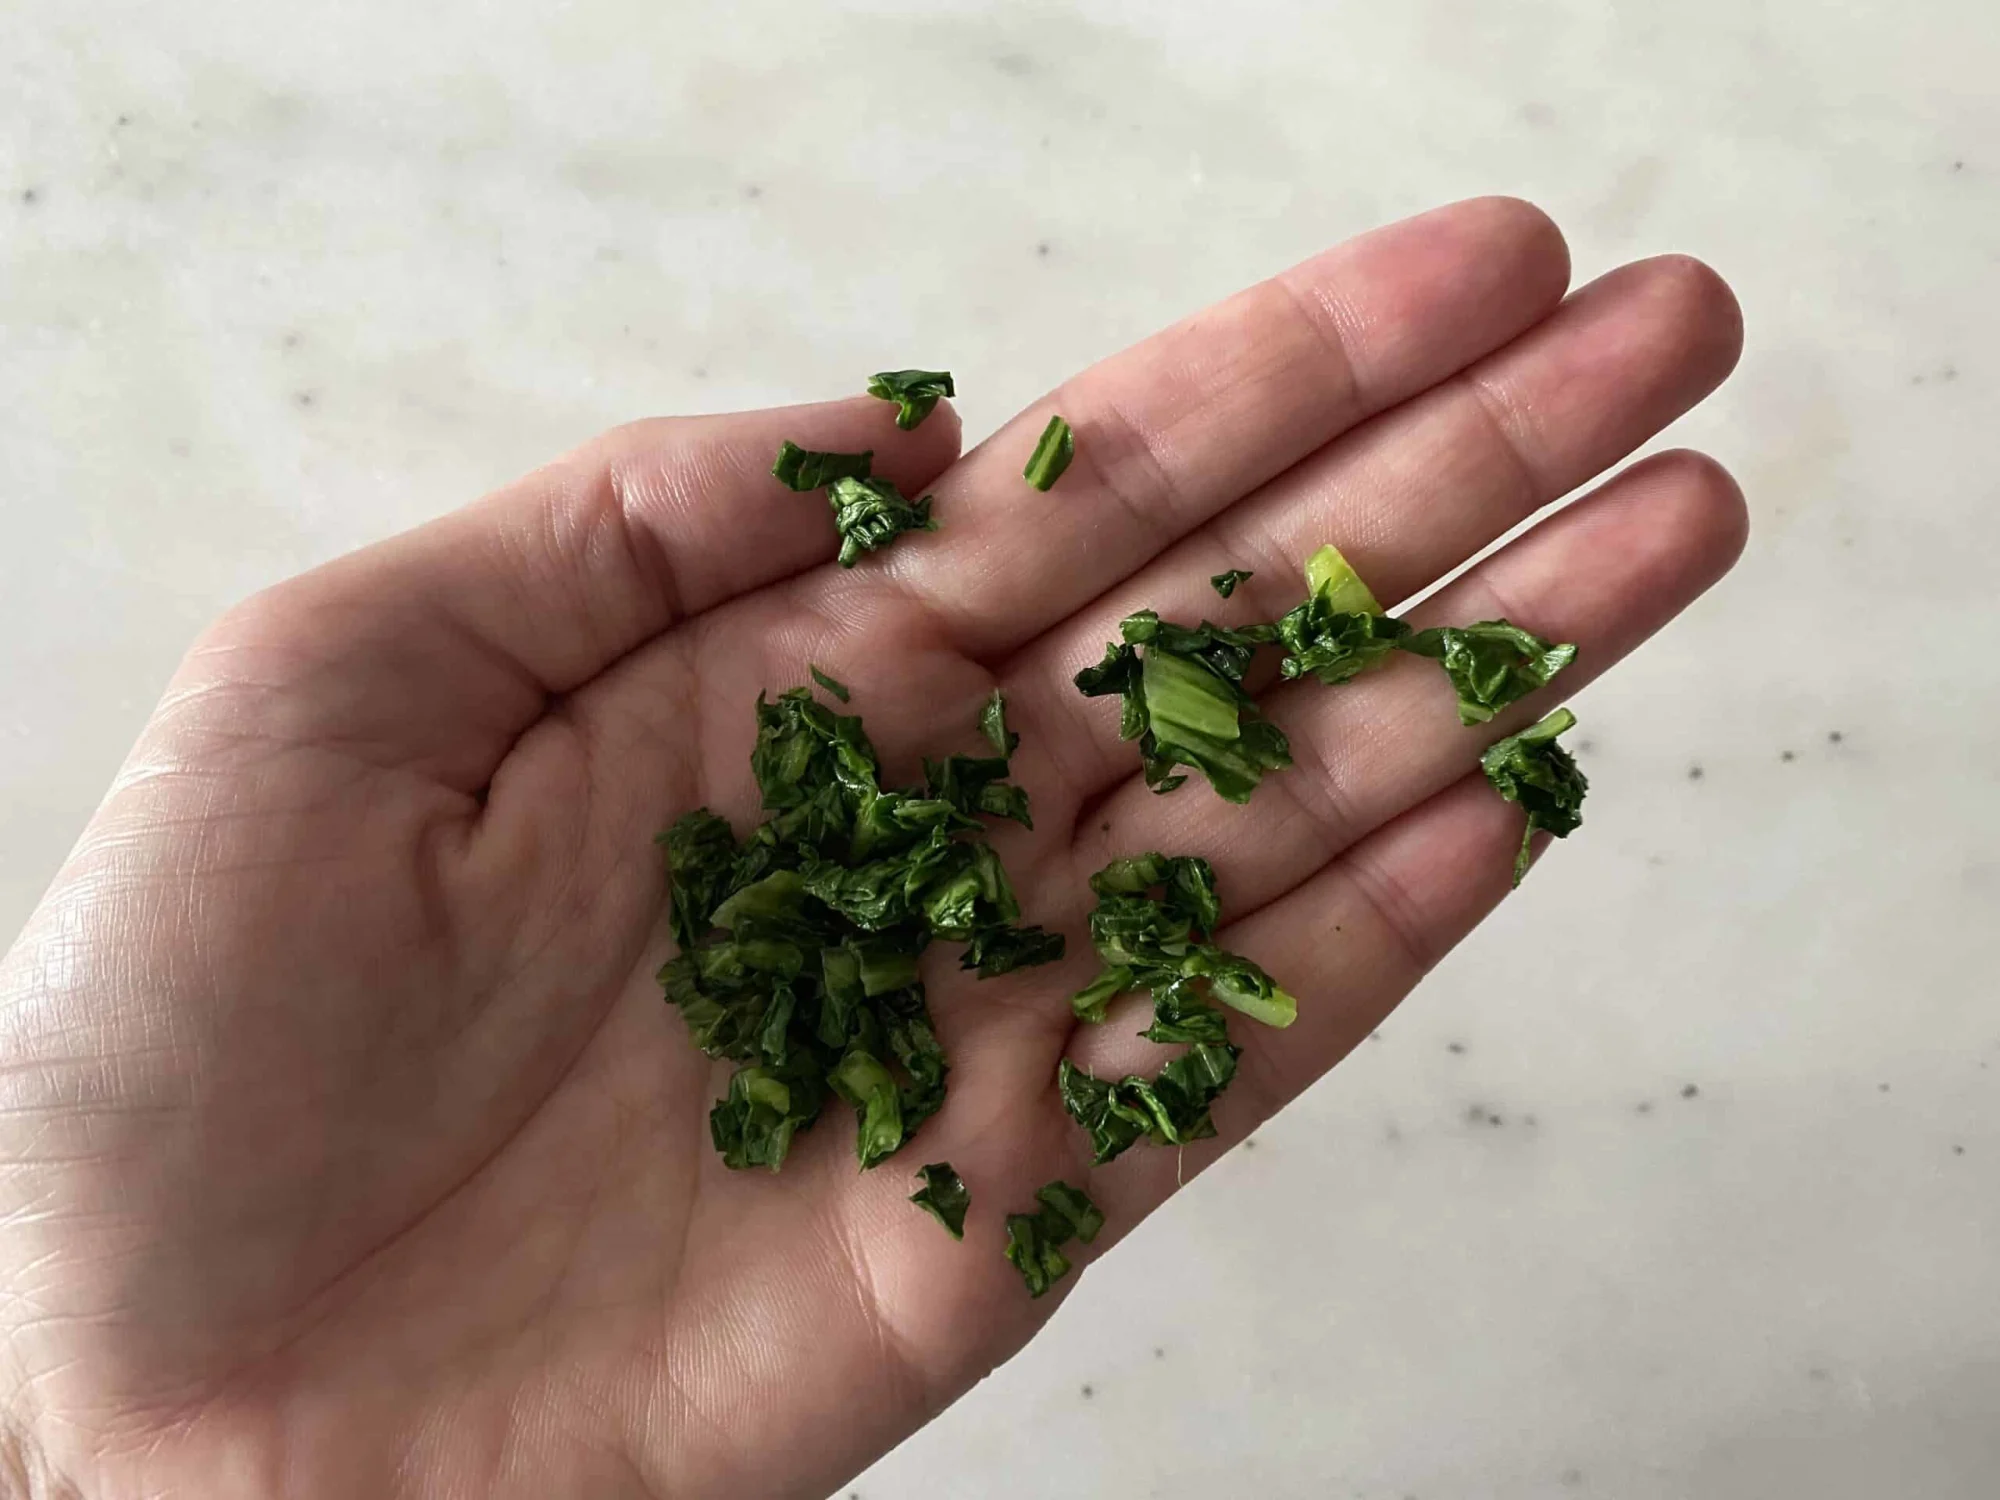 Minced cooked bok choy leaves in the palm of an adult hand